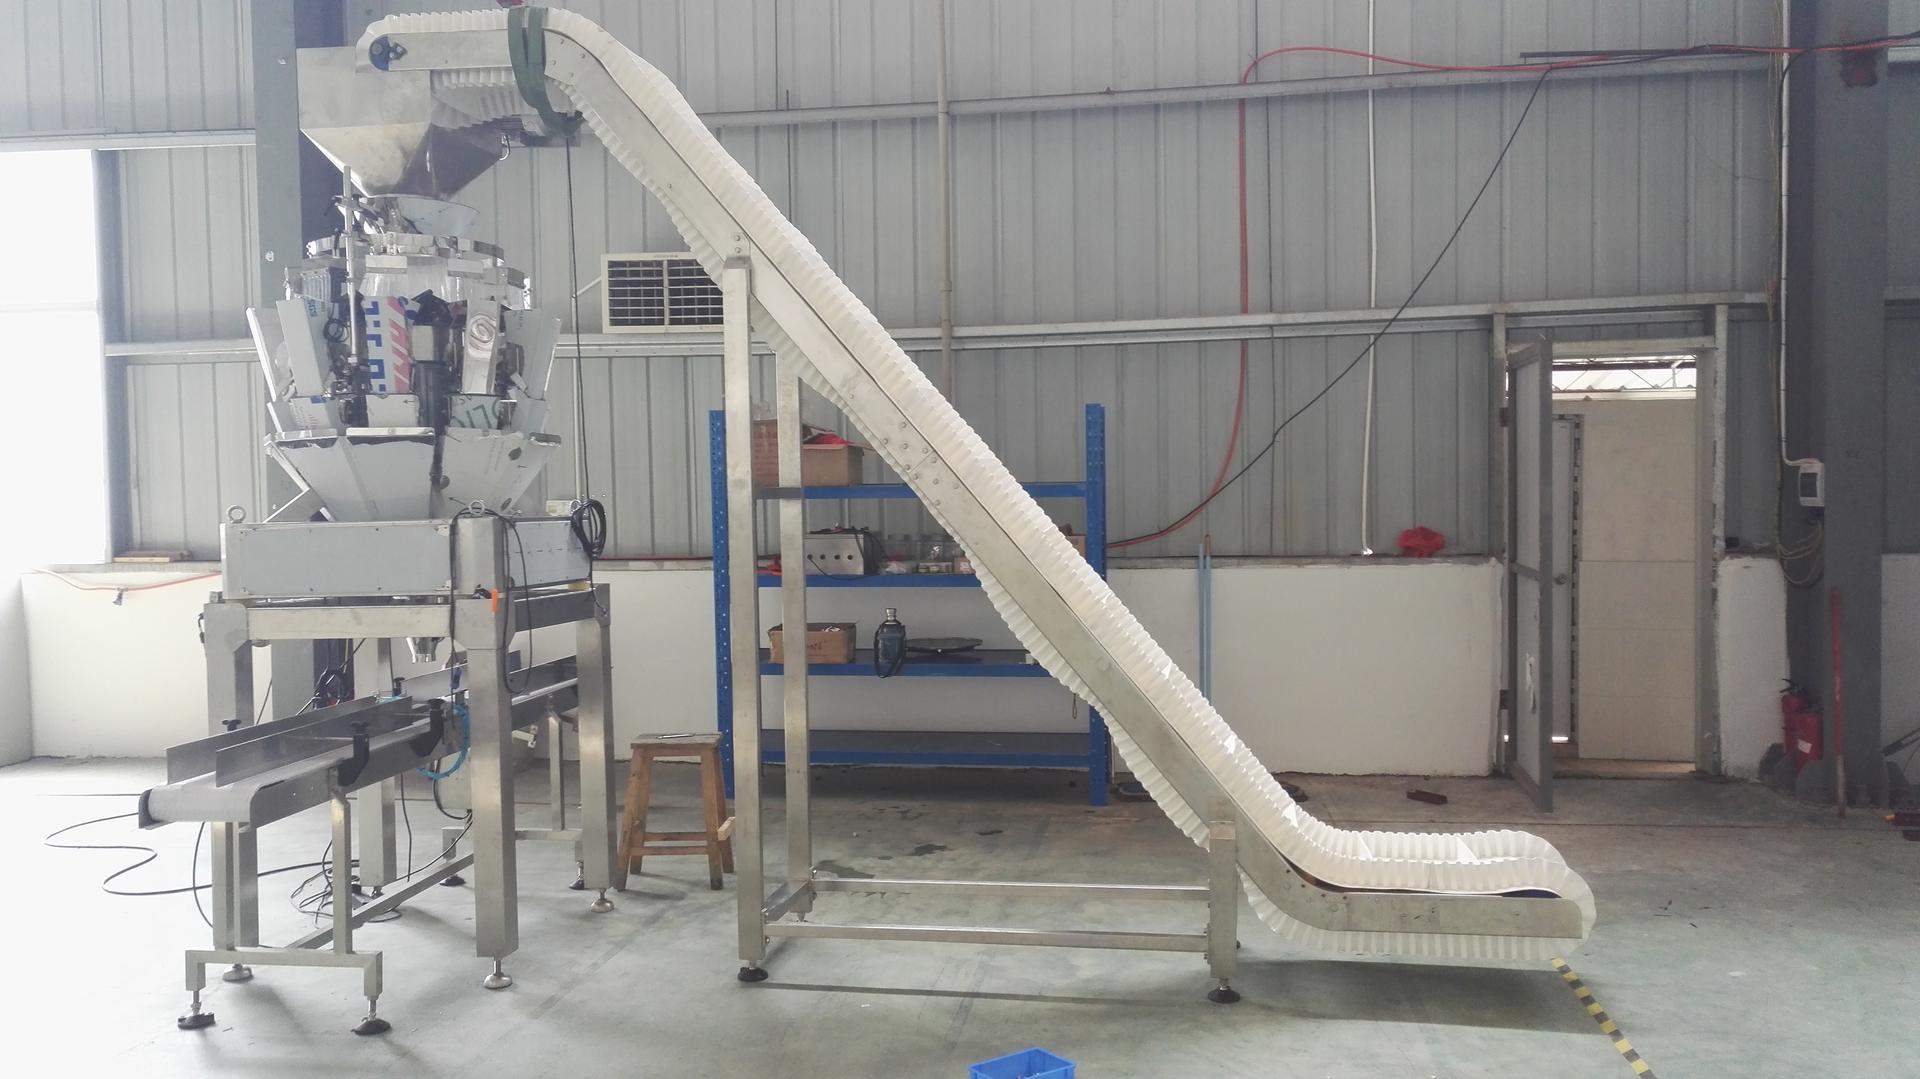 CE Automatic Tray Filling Line for Shrimp